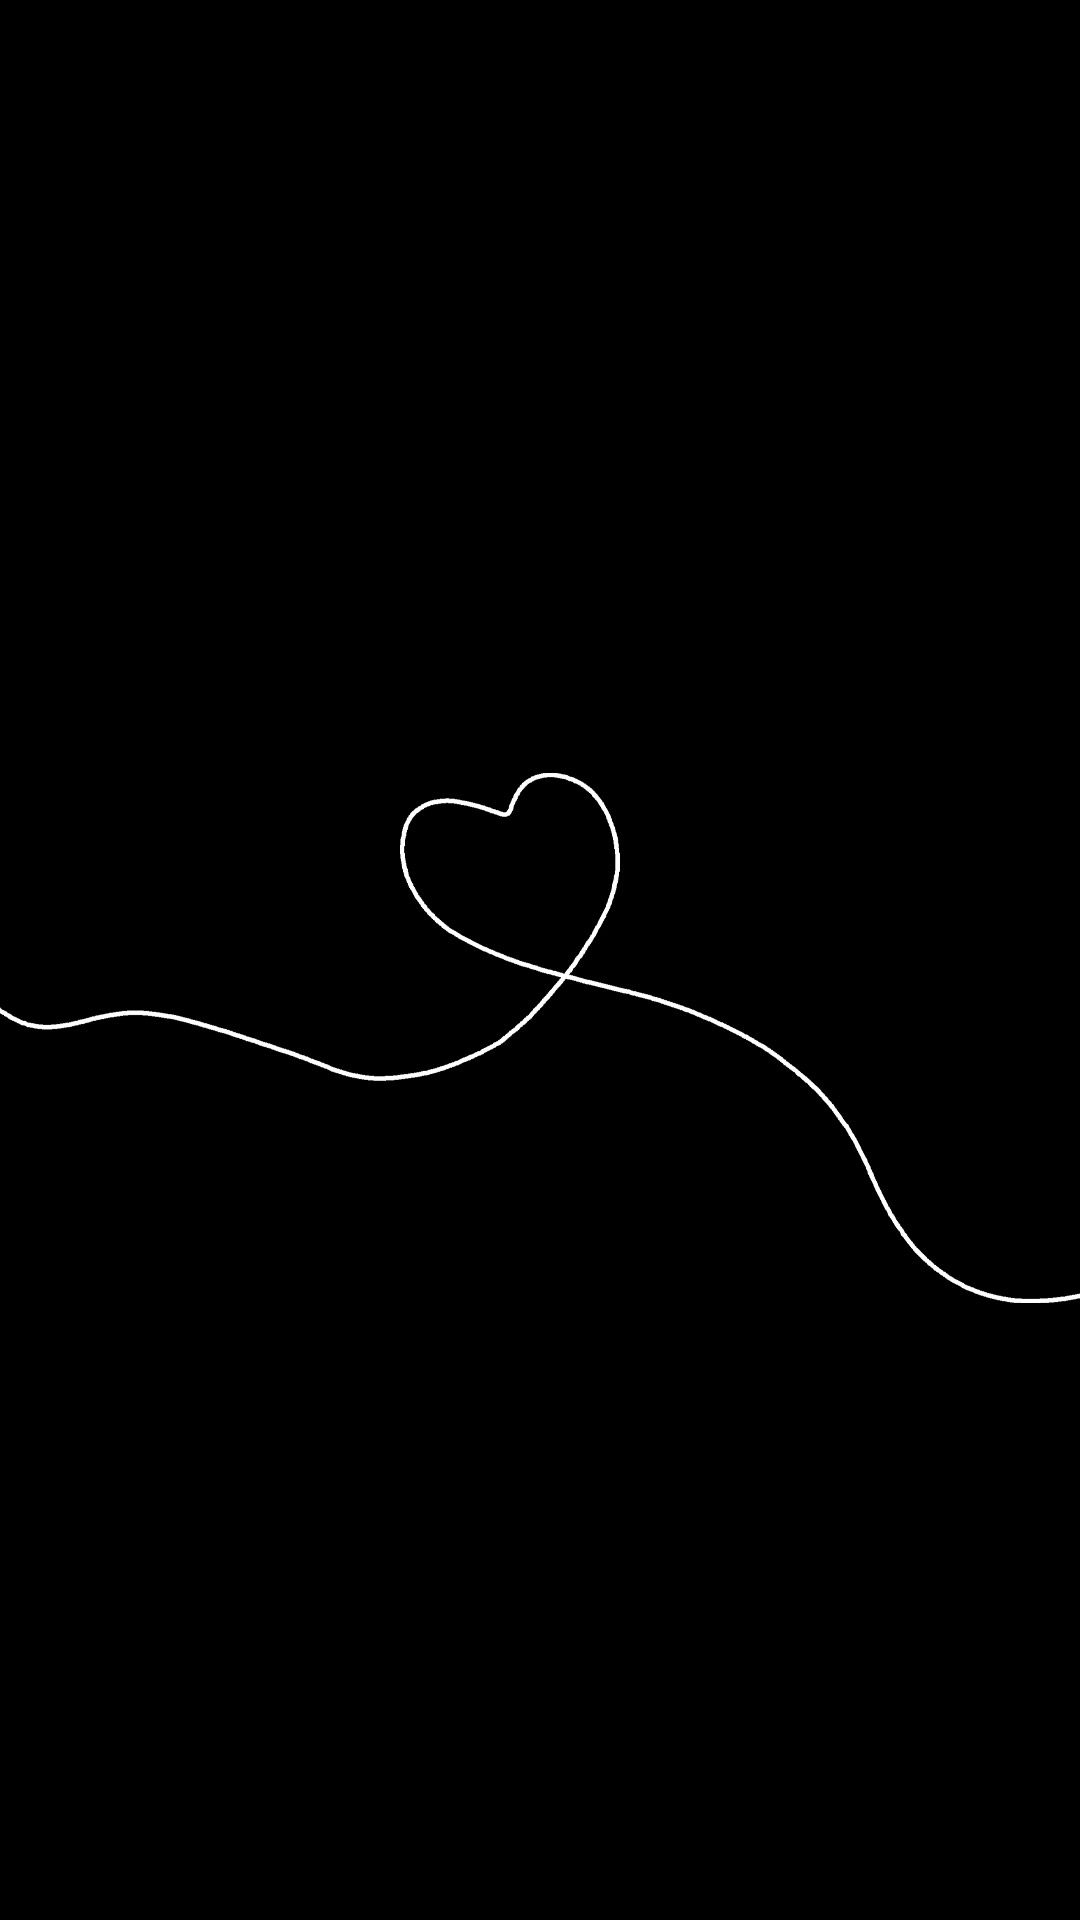 A single line drawing of heart on black background - Black heart